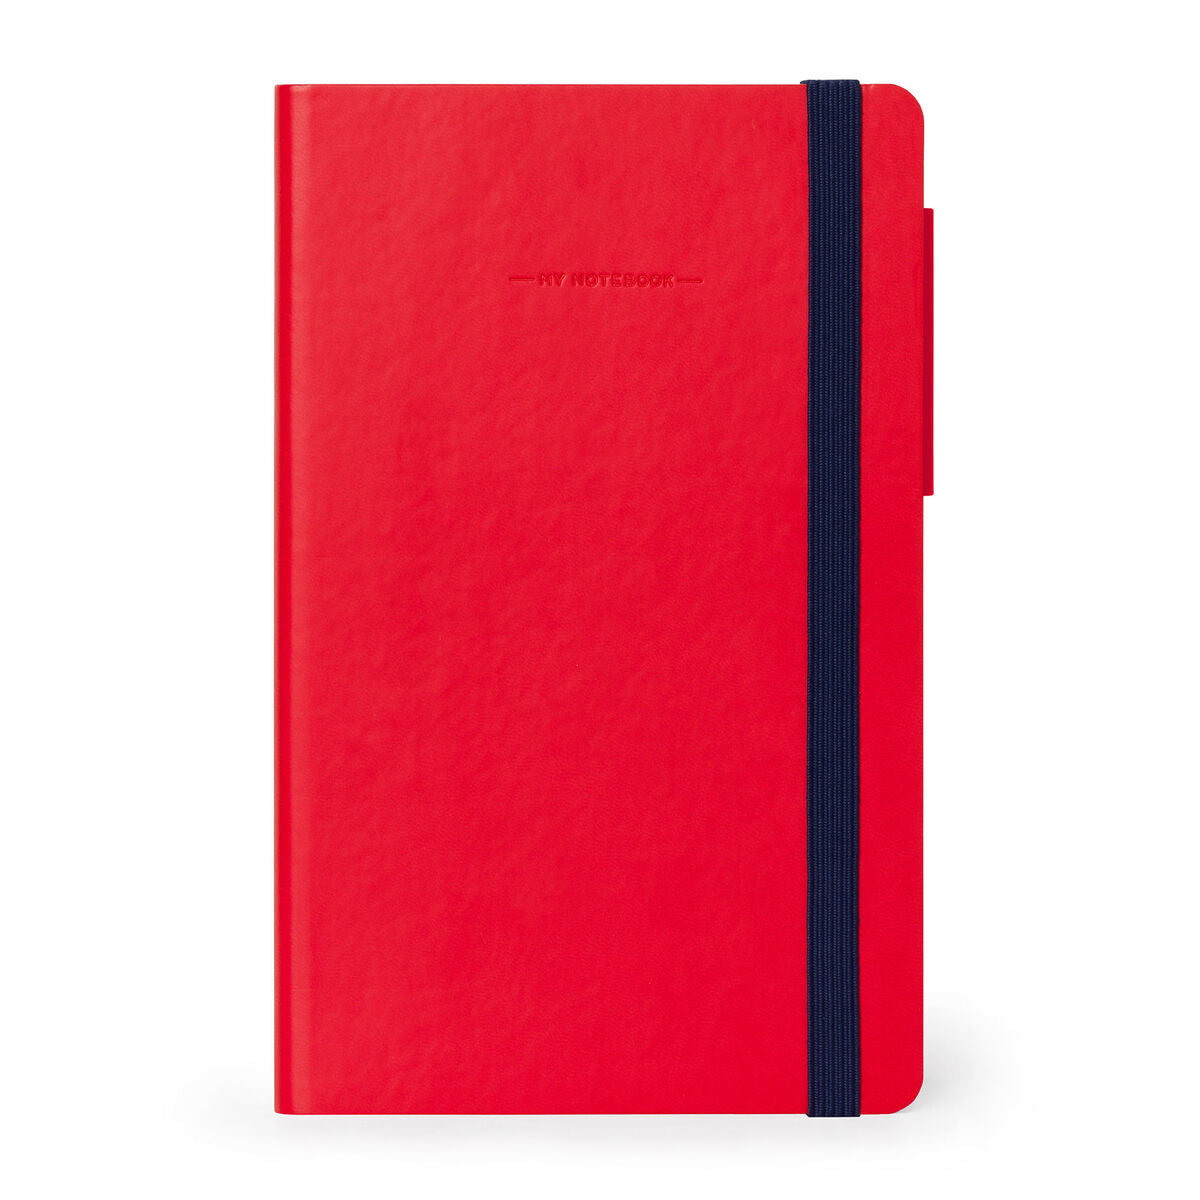 Notebook | Legami Medium Notebook lined- Red by Weirs of Baggot Street